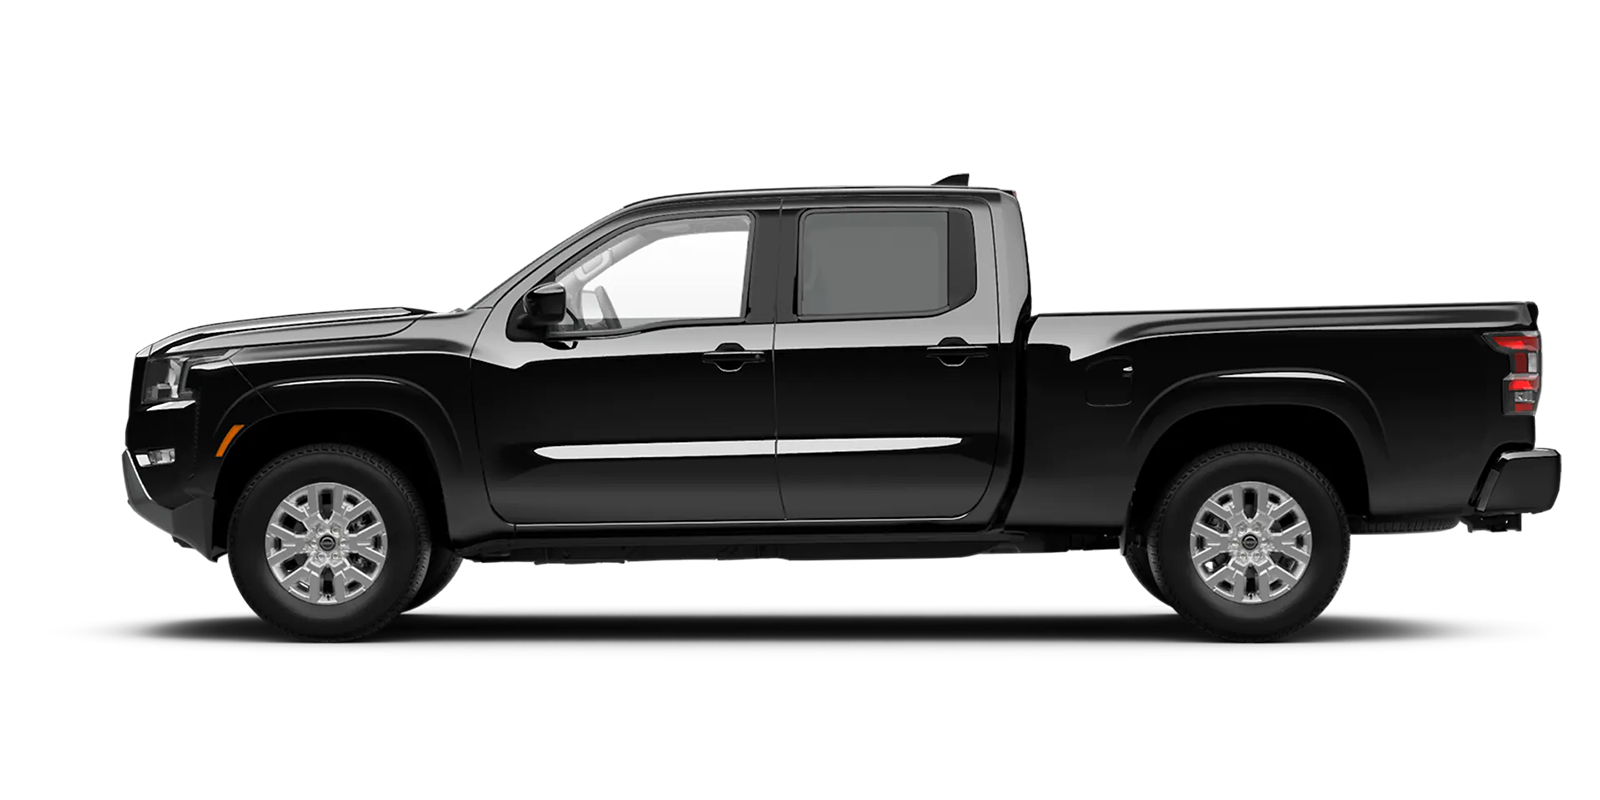 2022 Frontier Crew Cab Long Bed SV 4x2 in Super Black | Neil Huffman Nissan of Frankfort in Frankfort KY